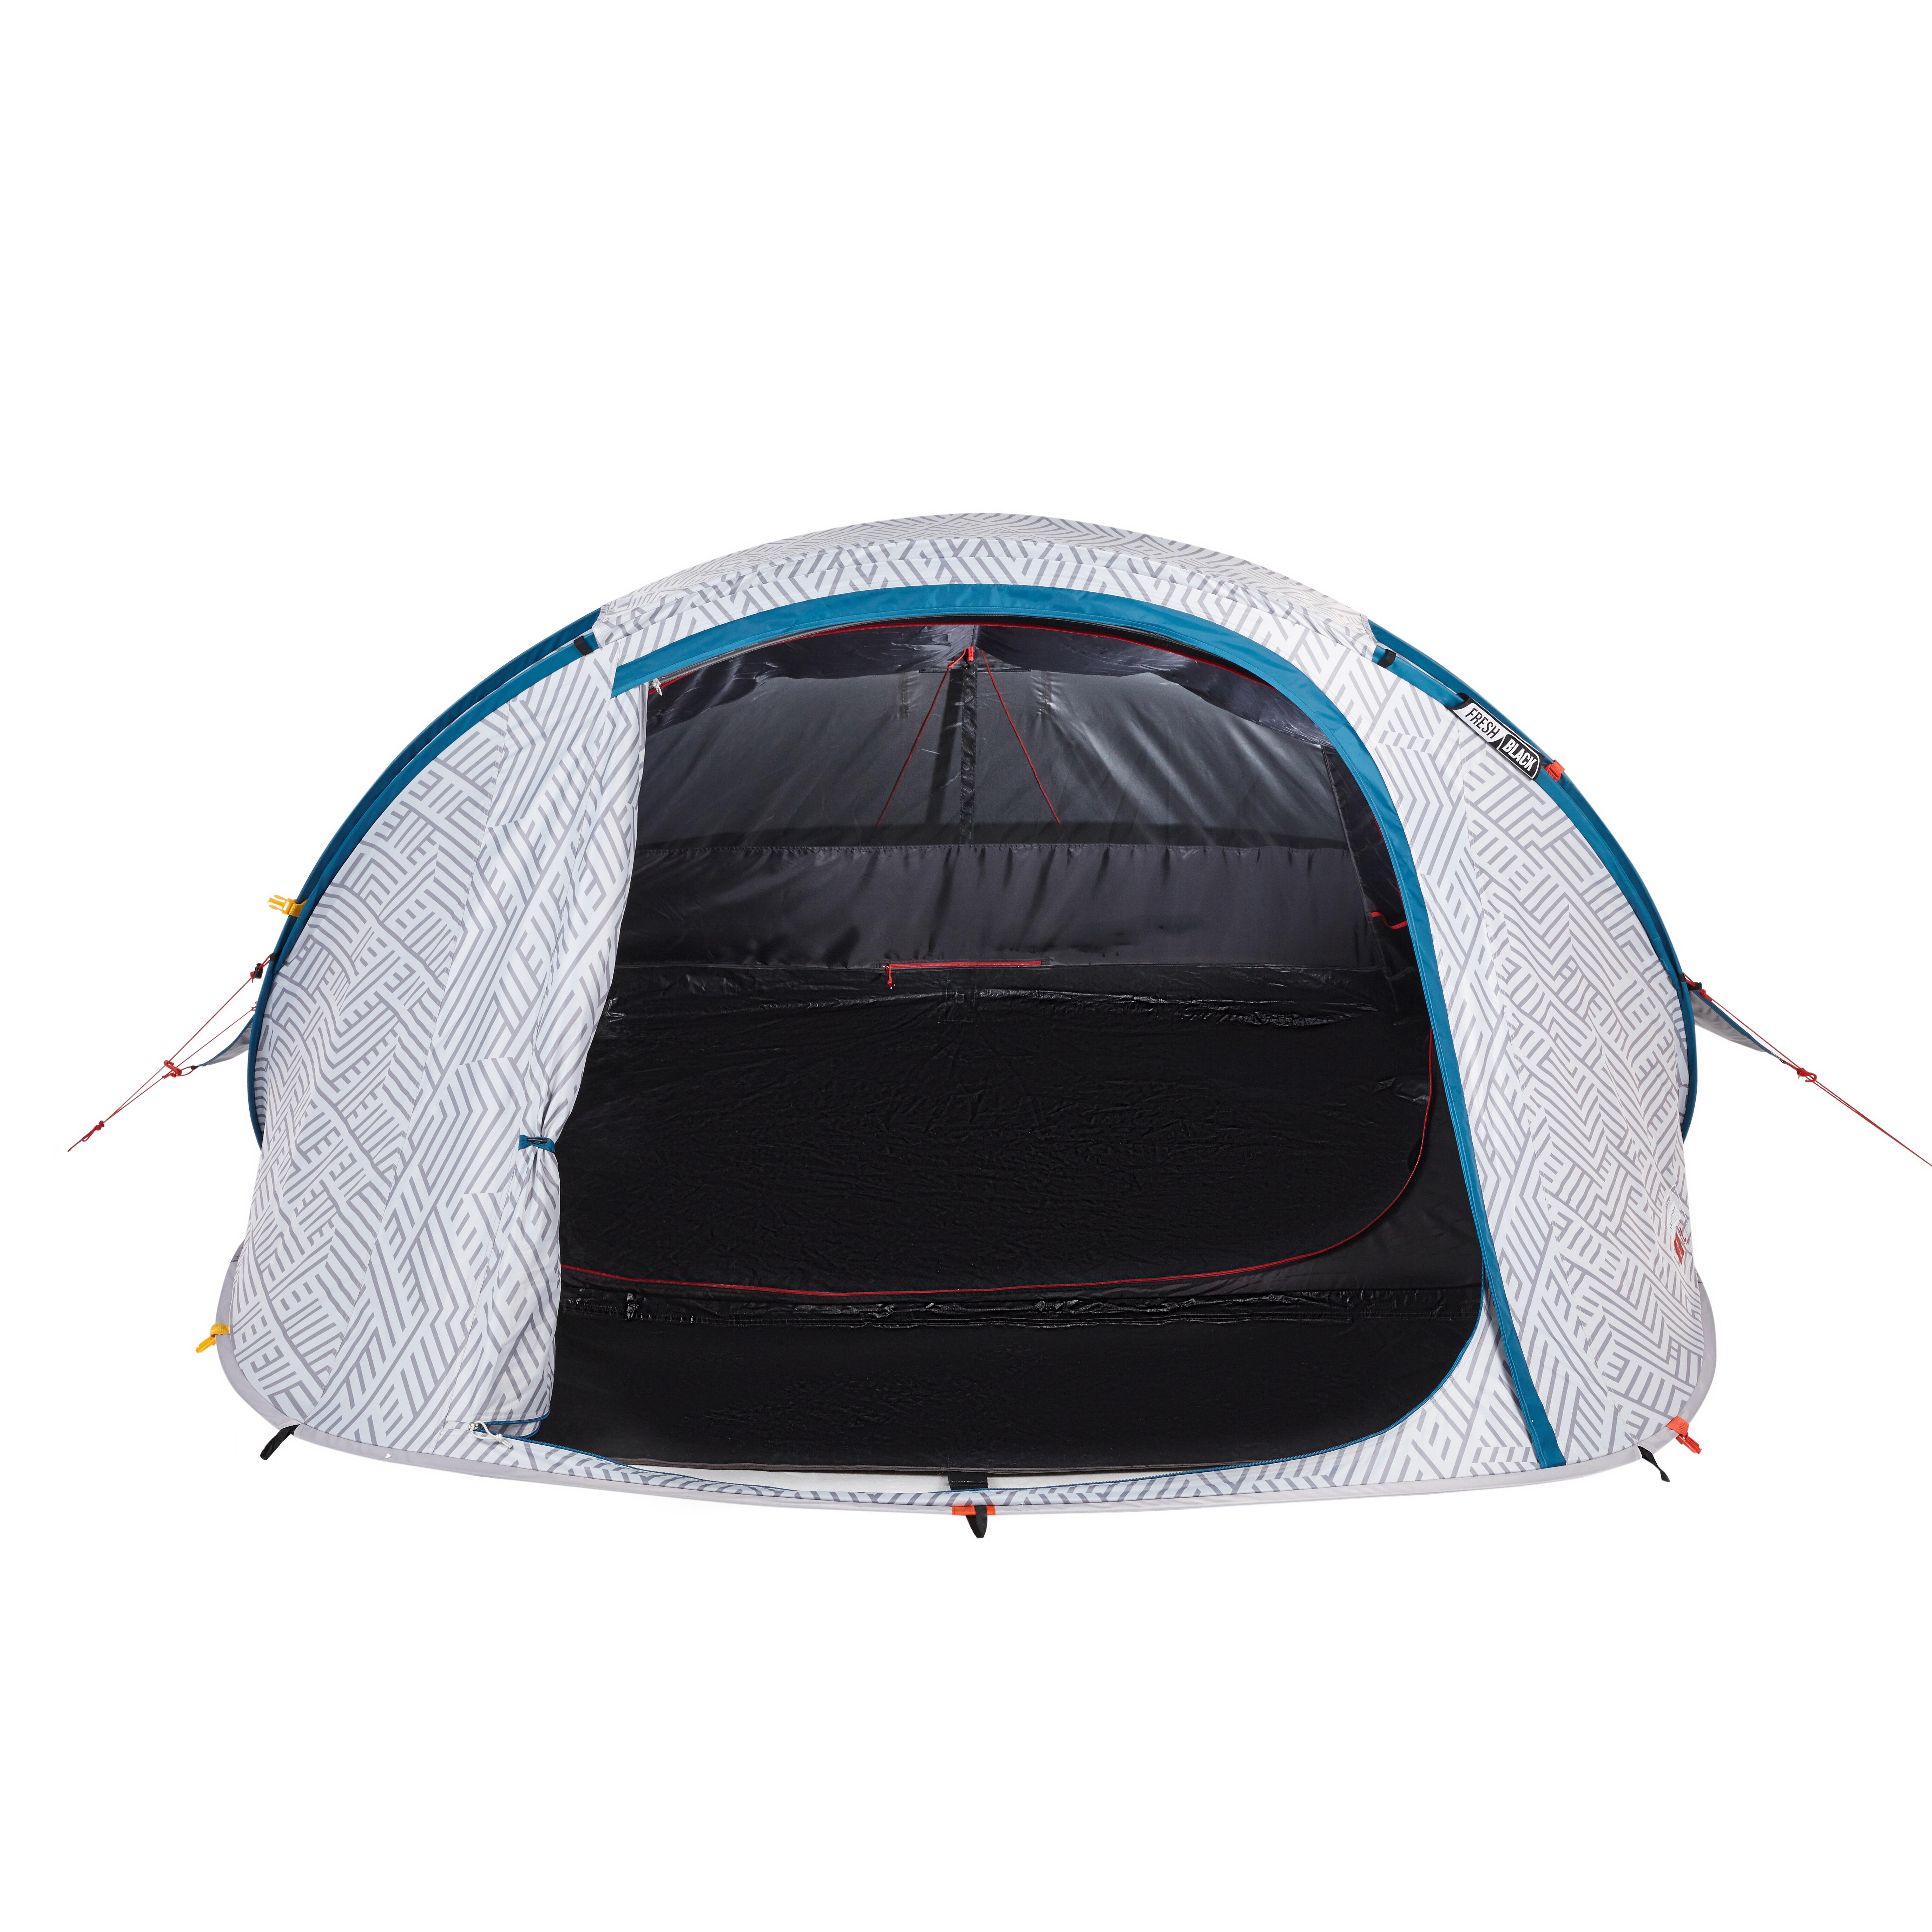 2 SECONDS CAMPING TENT FRESH & BLACK XL – 3 PEOPLE - CHINA - Decathlon